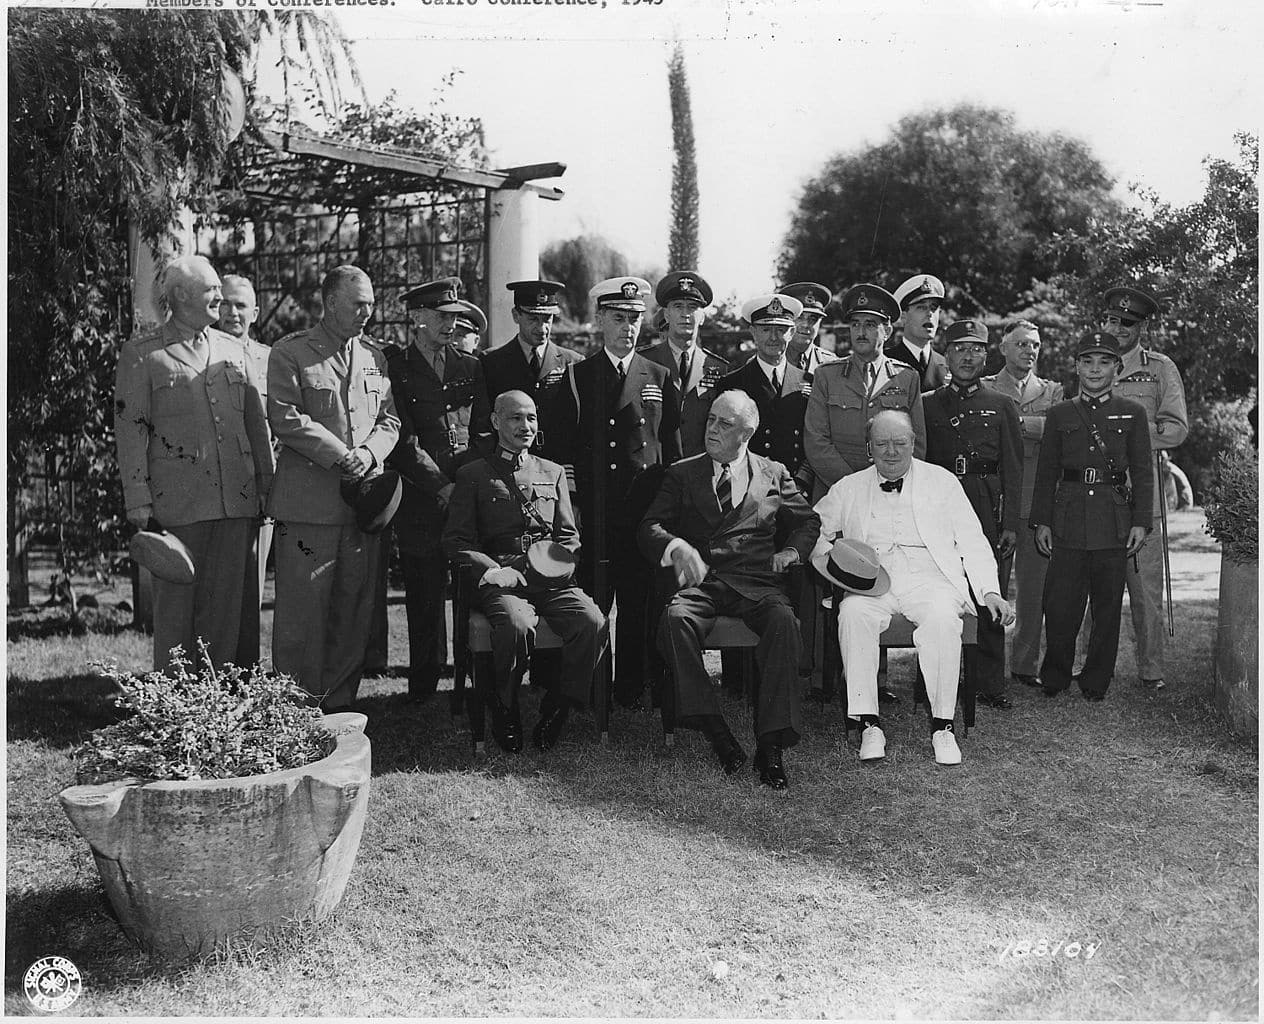 The Potsdam Conference - July 20th 1945 - Roosevelt, Churchill, and Chinese leader Chiang Kai Shek at the Cairo Conference in 1943